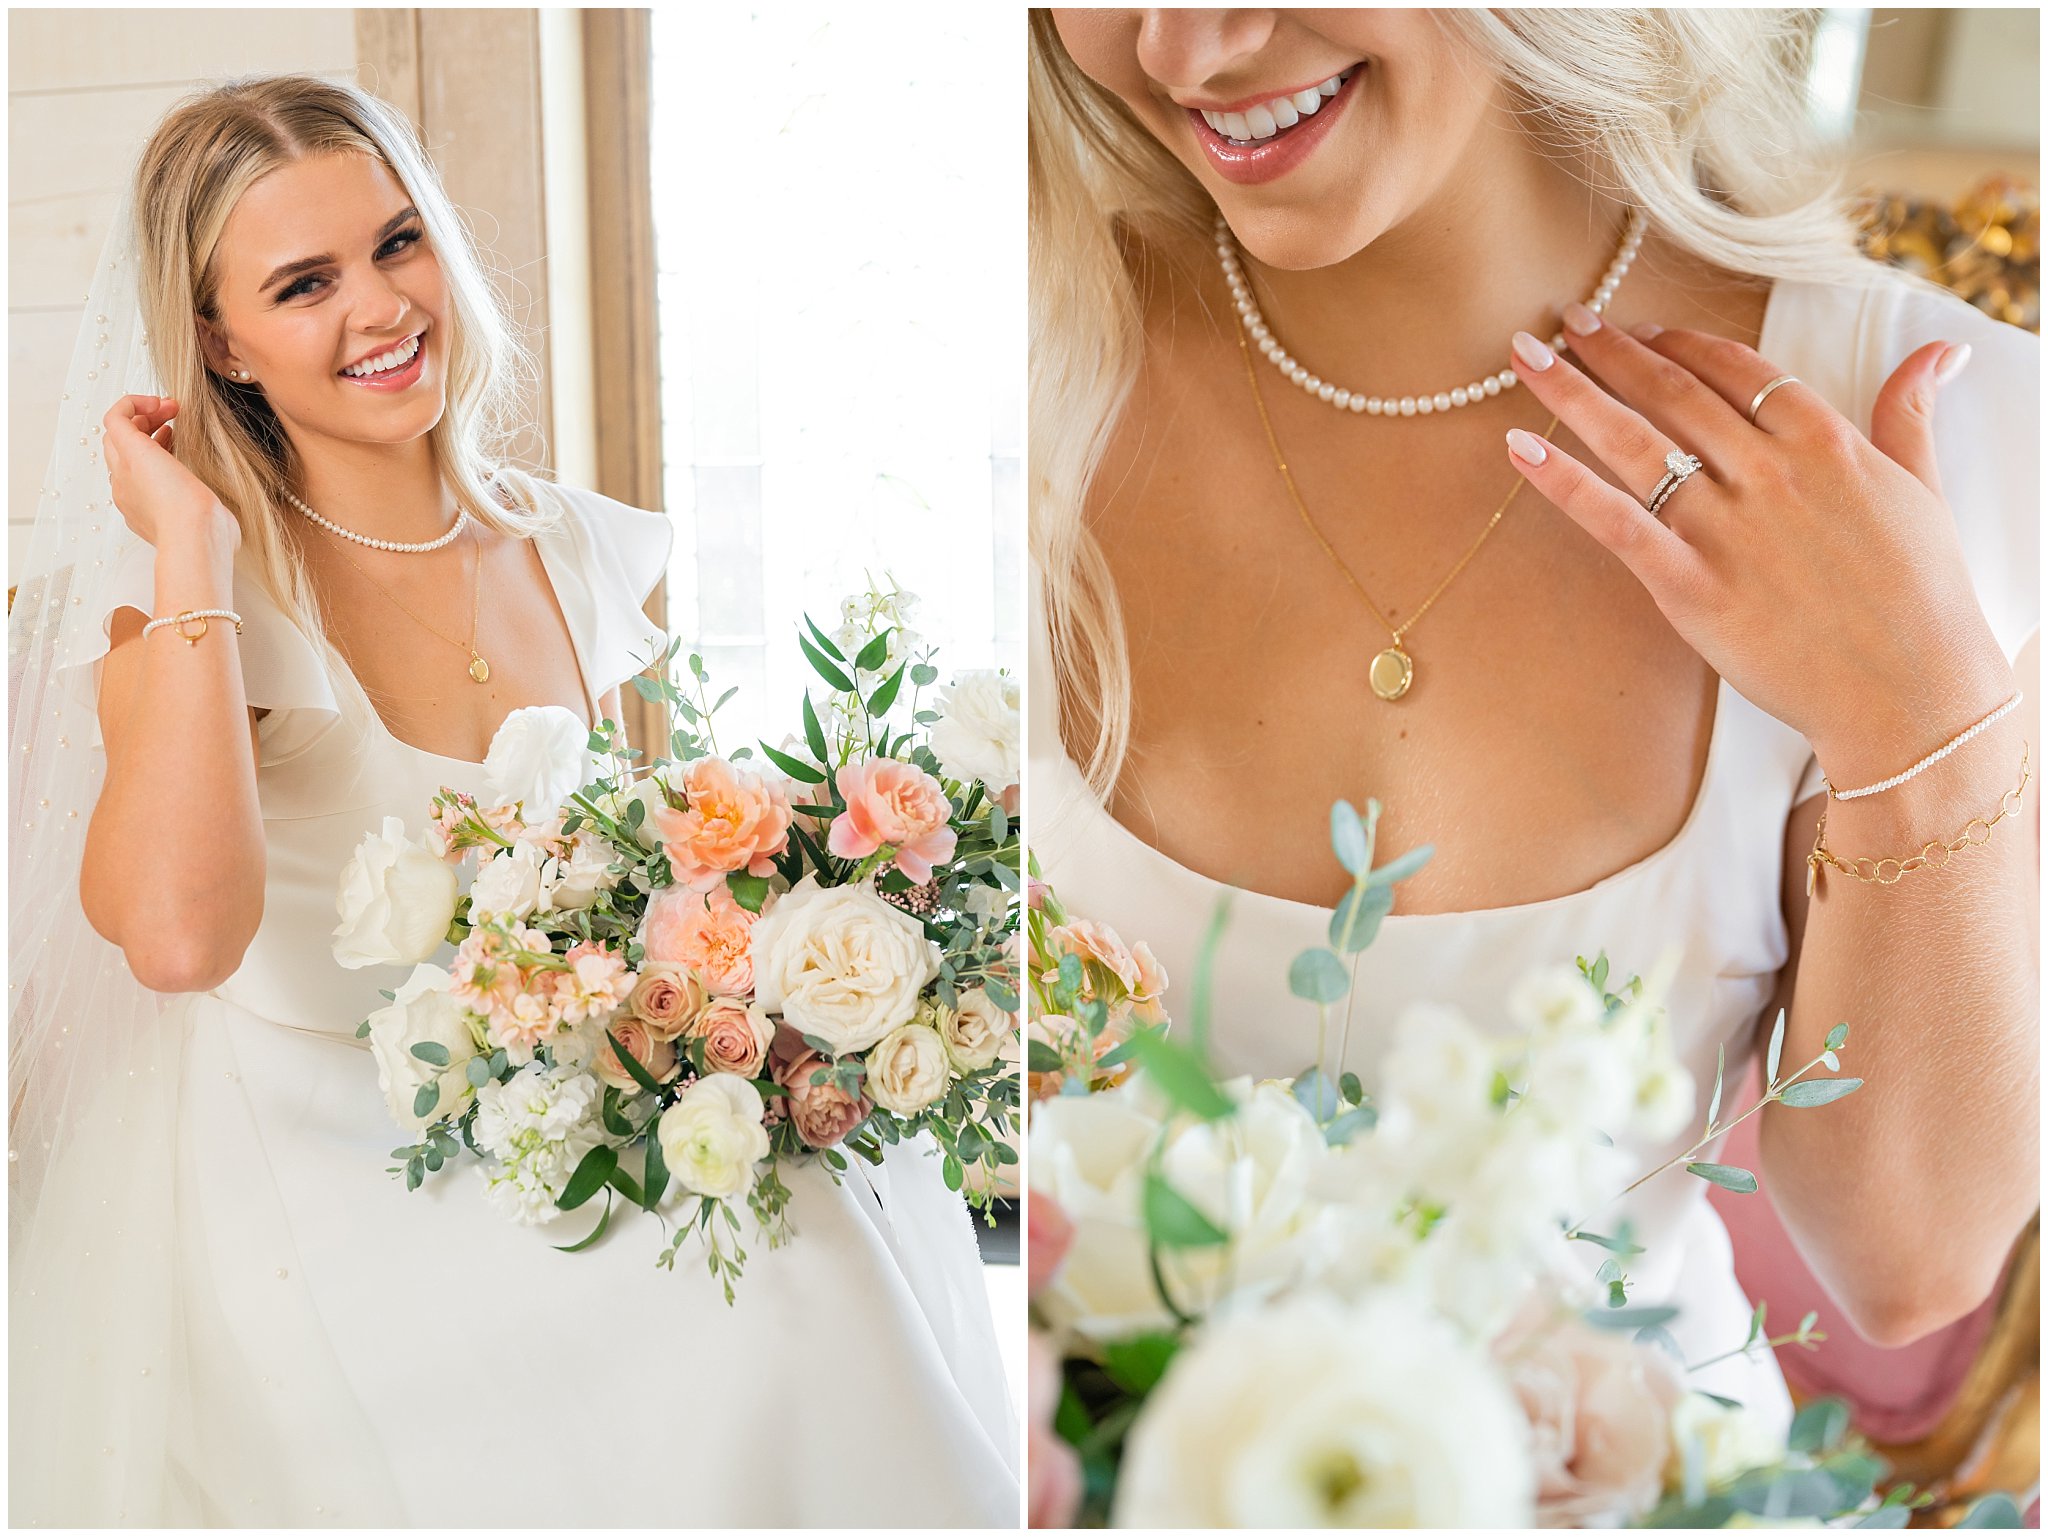 Bridal portraits and wedding day details at Walker Farms